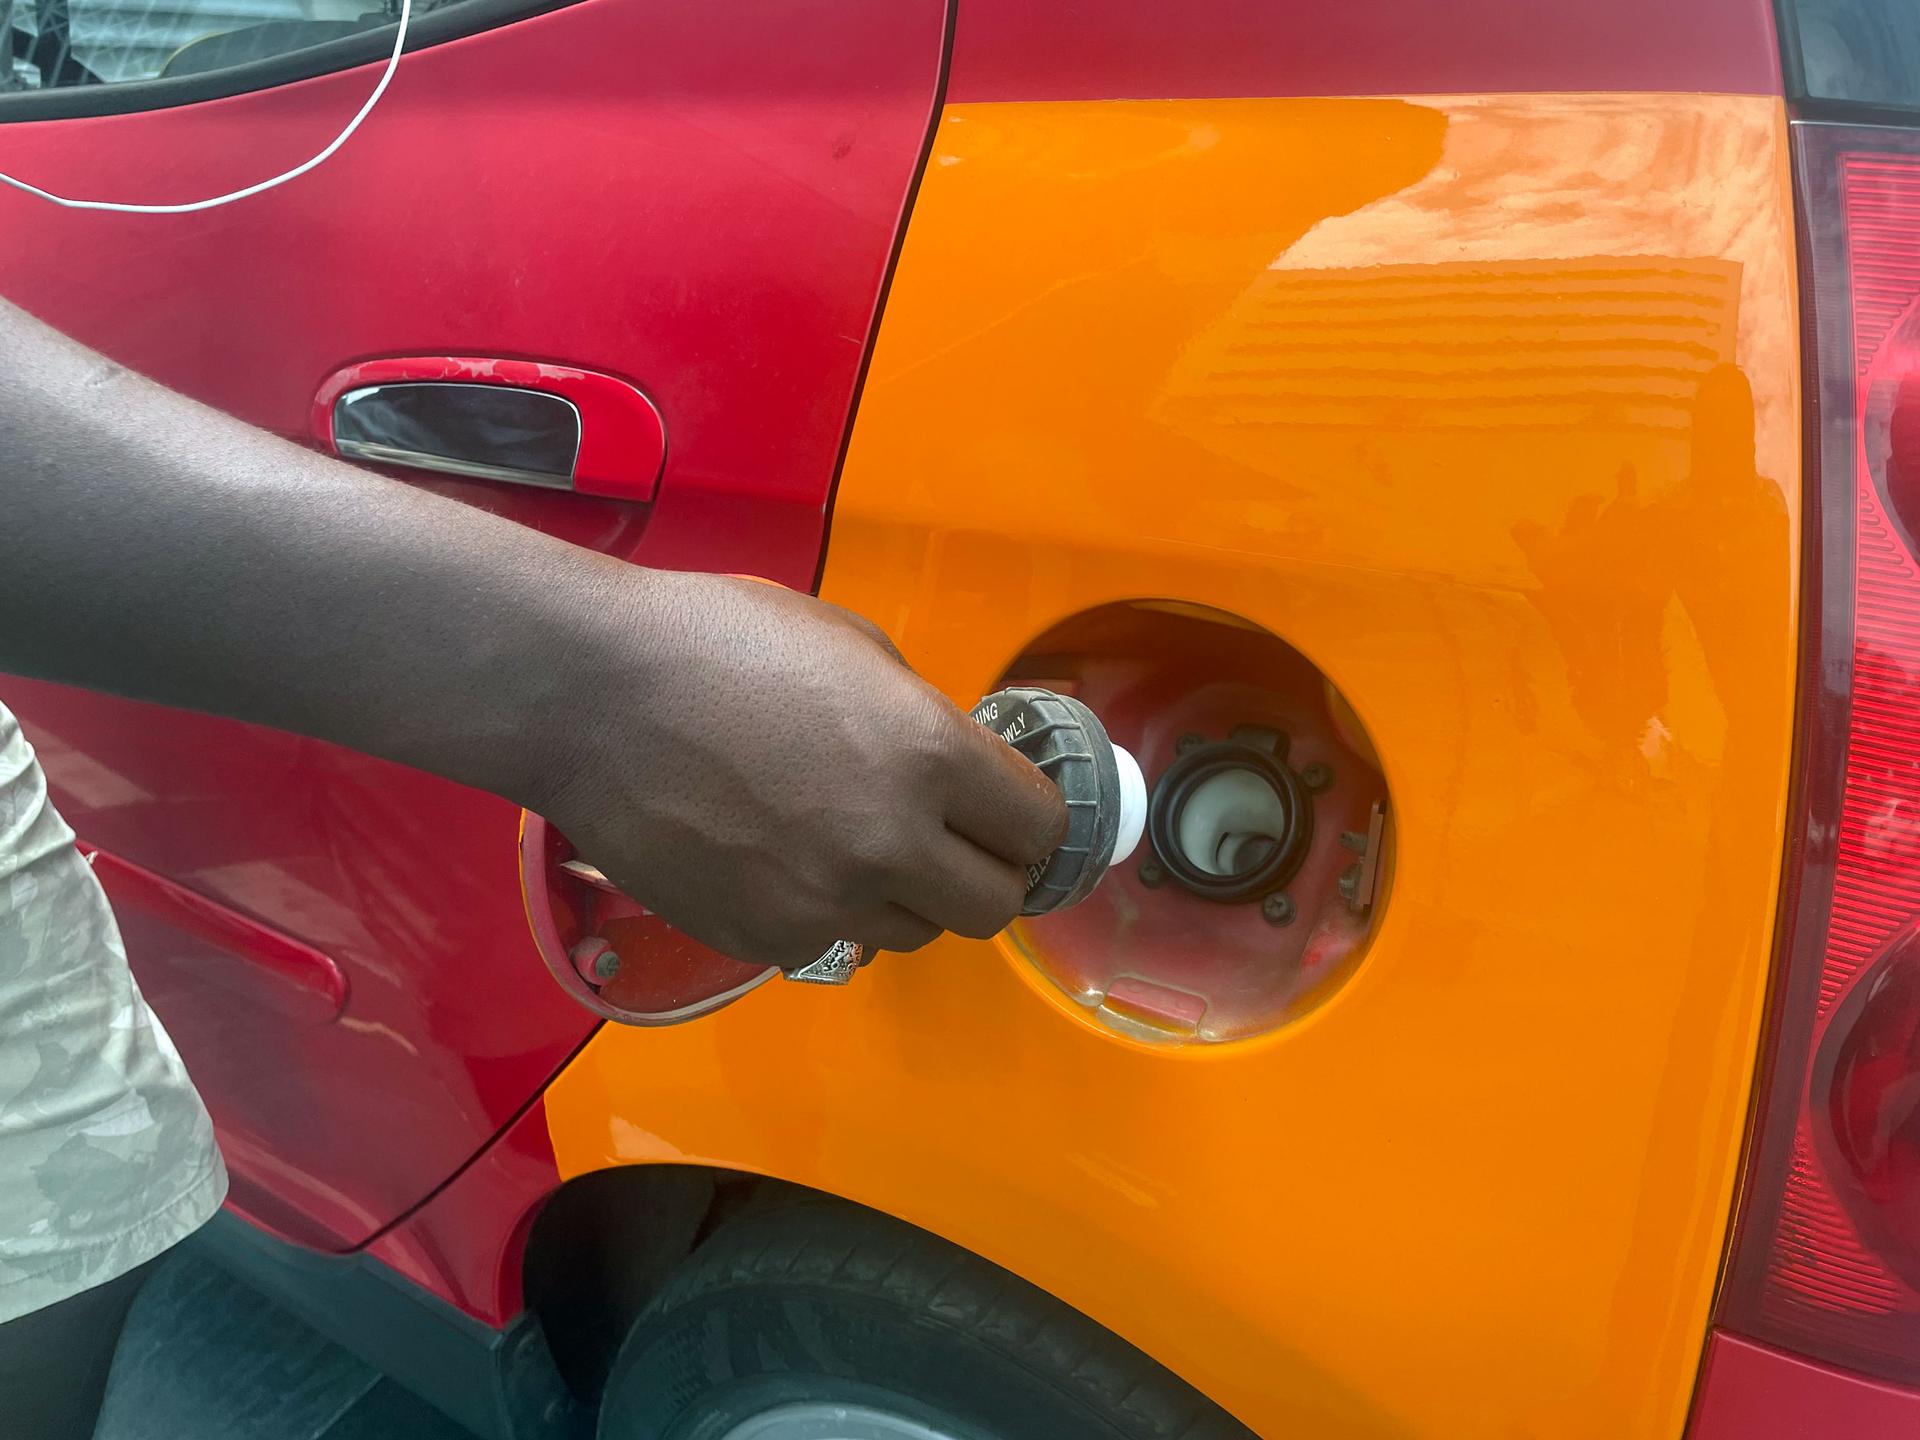 Due to surging oil prices, filling up a tank of gas can cost $6.25 a gallon in Ghana.